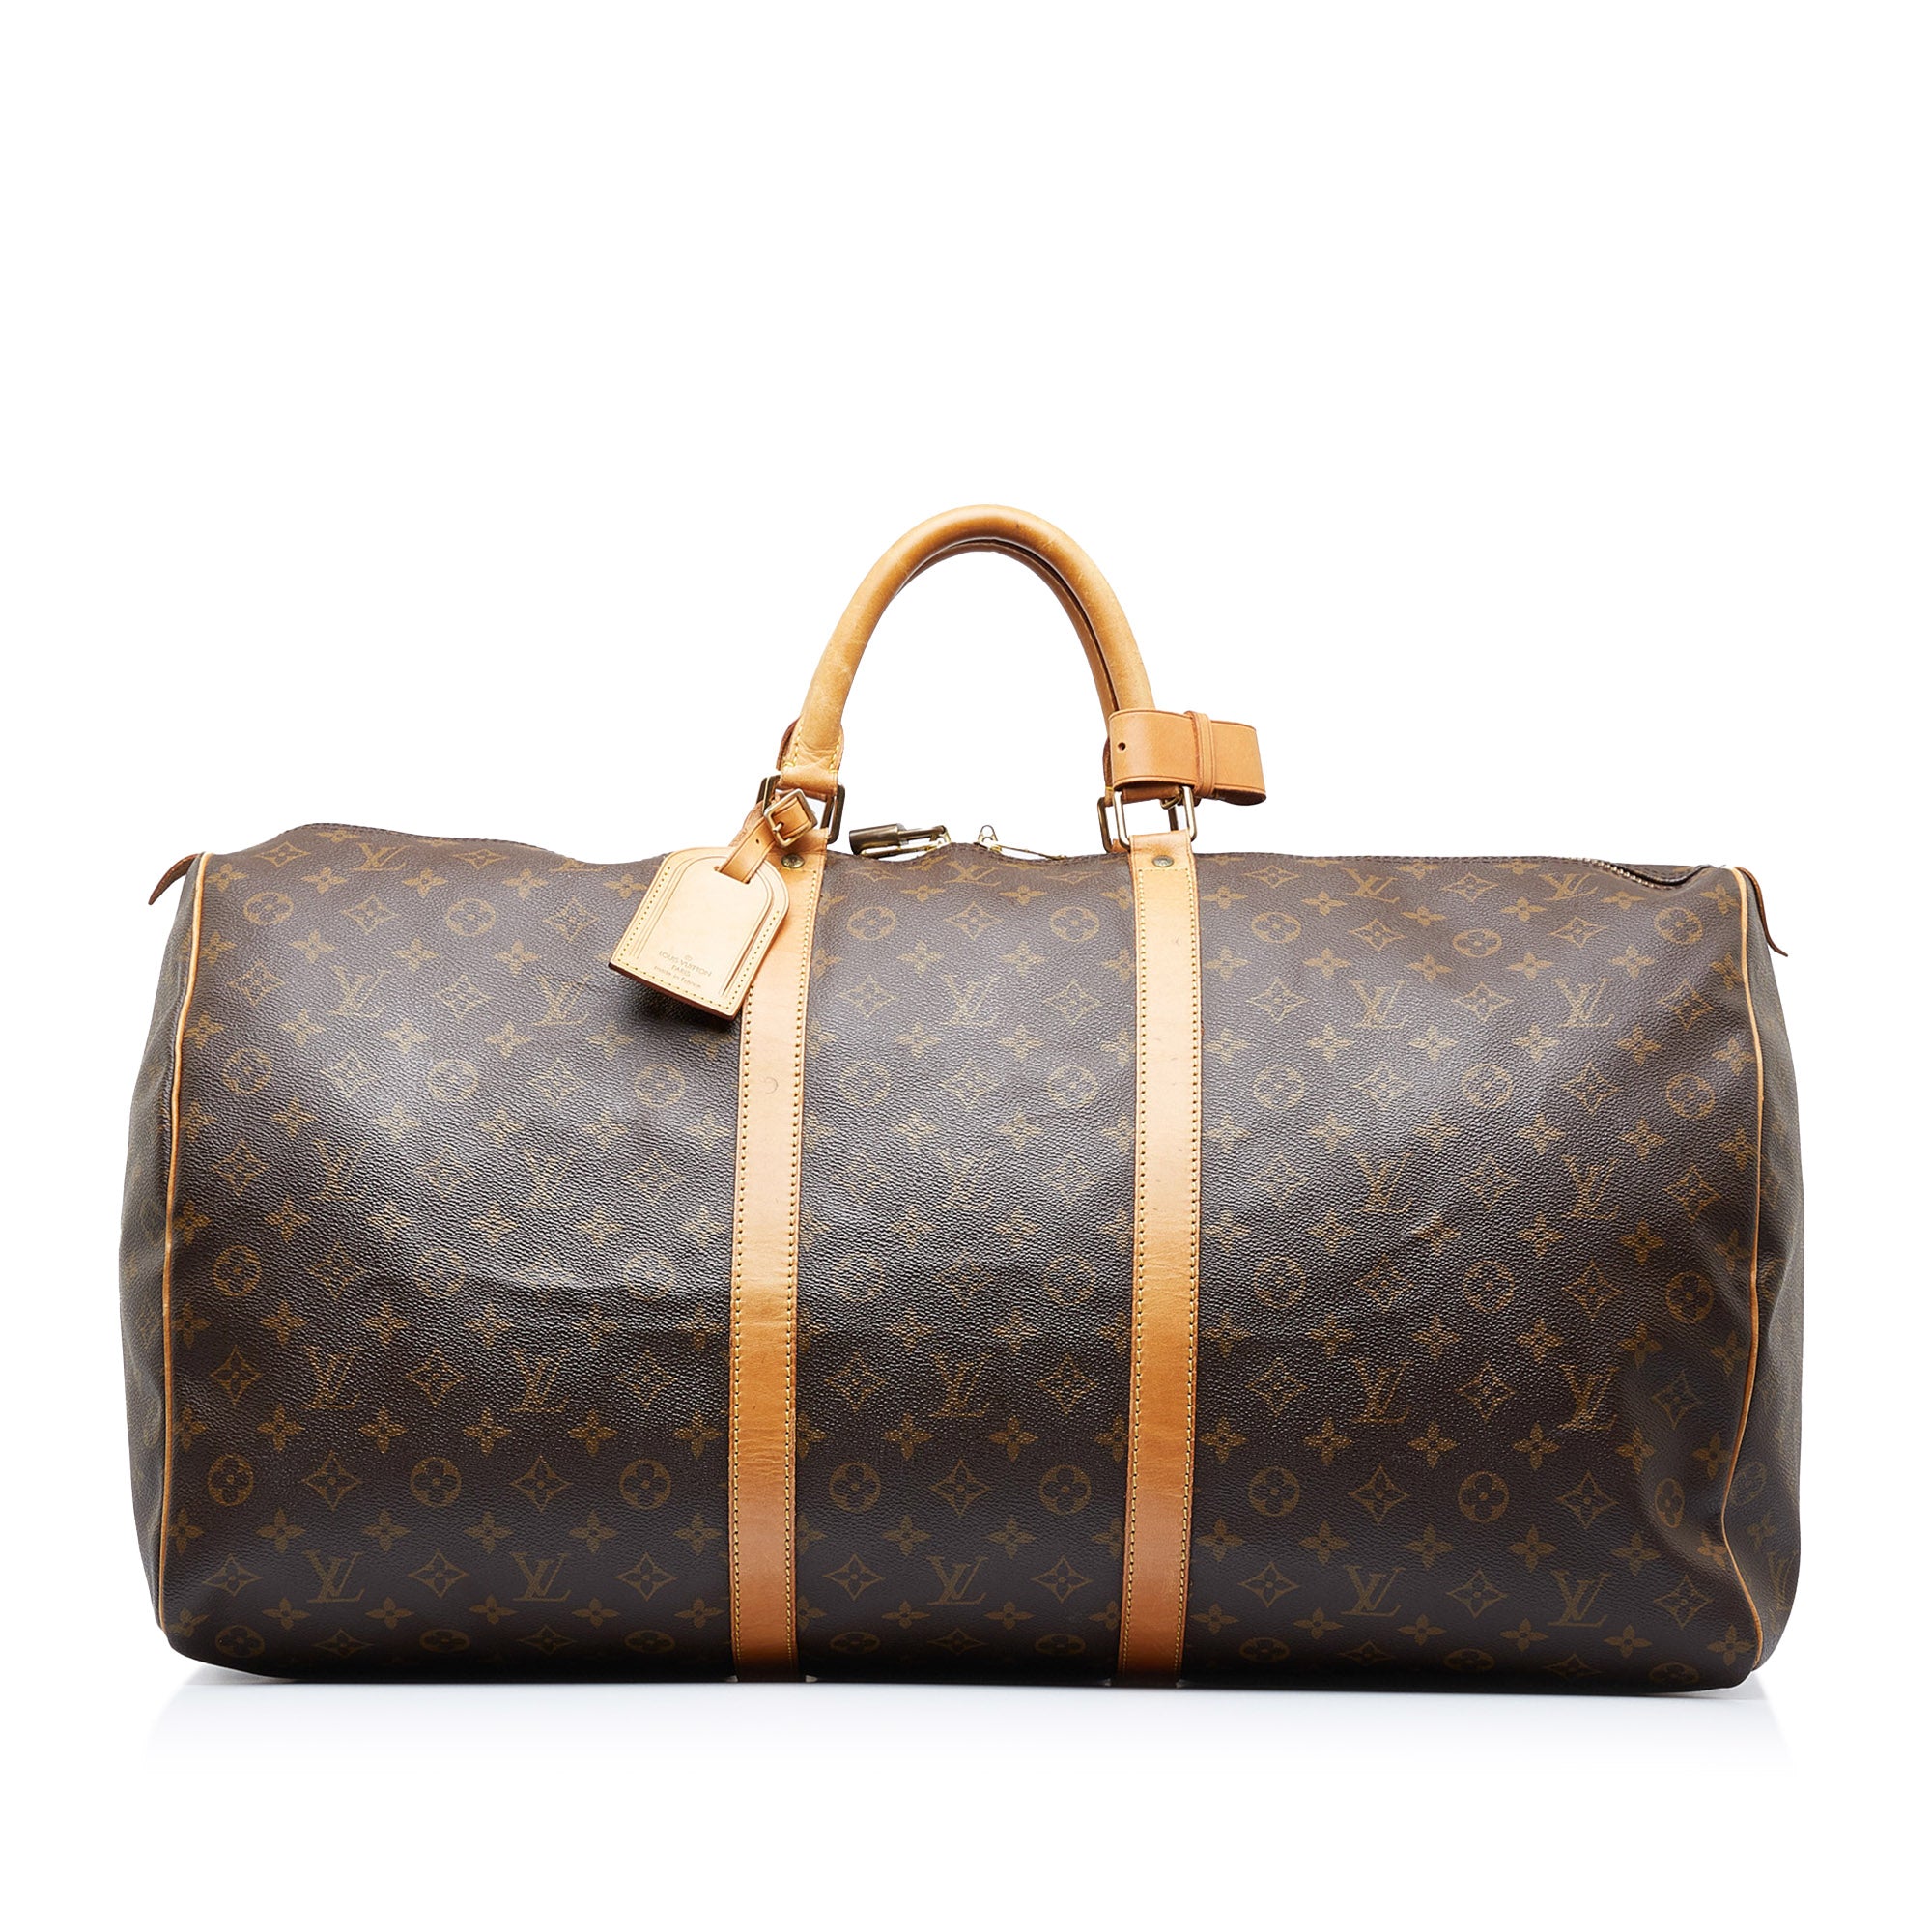 Louis Vuitton Keepall 45 Travel Bag in Brown EPI Leather